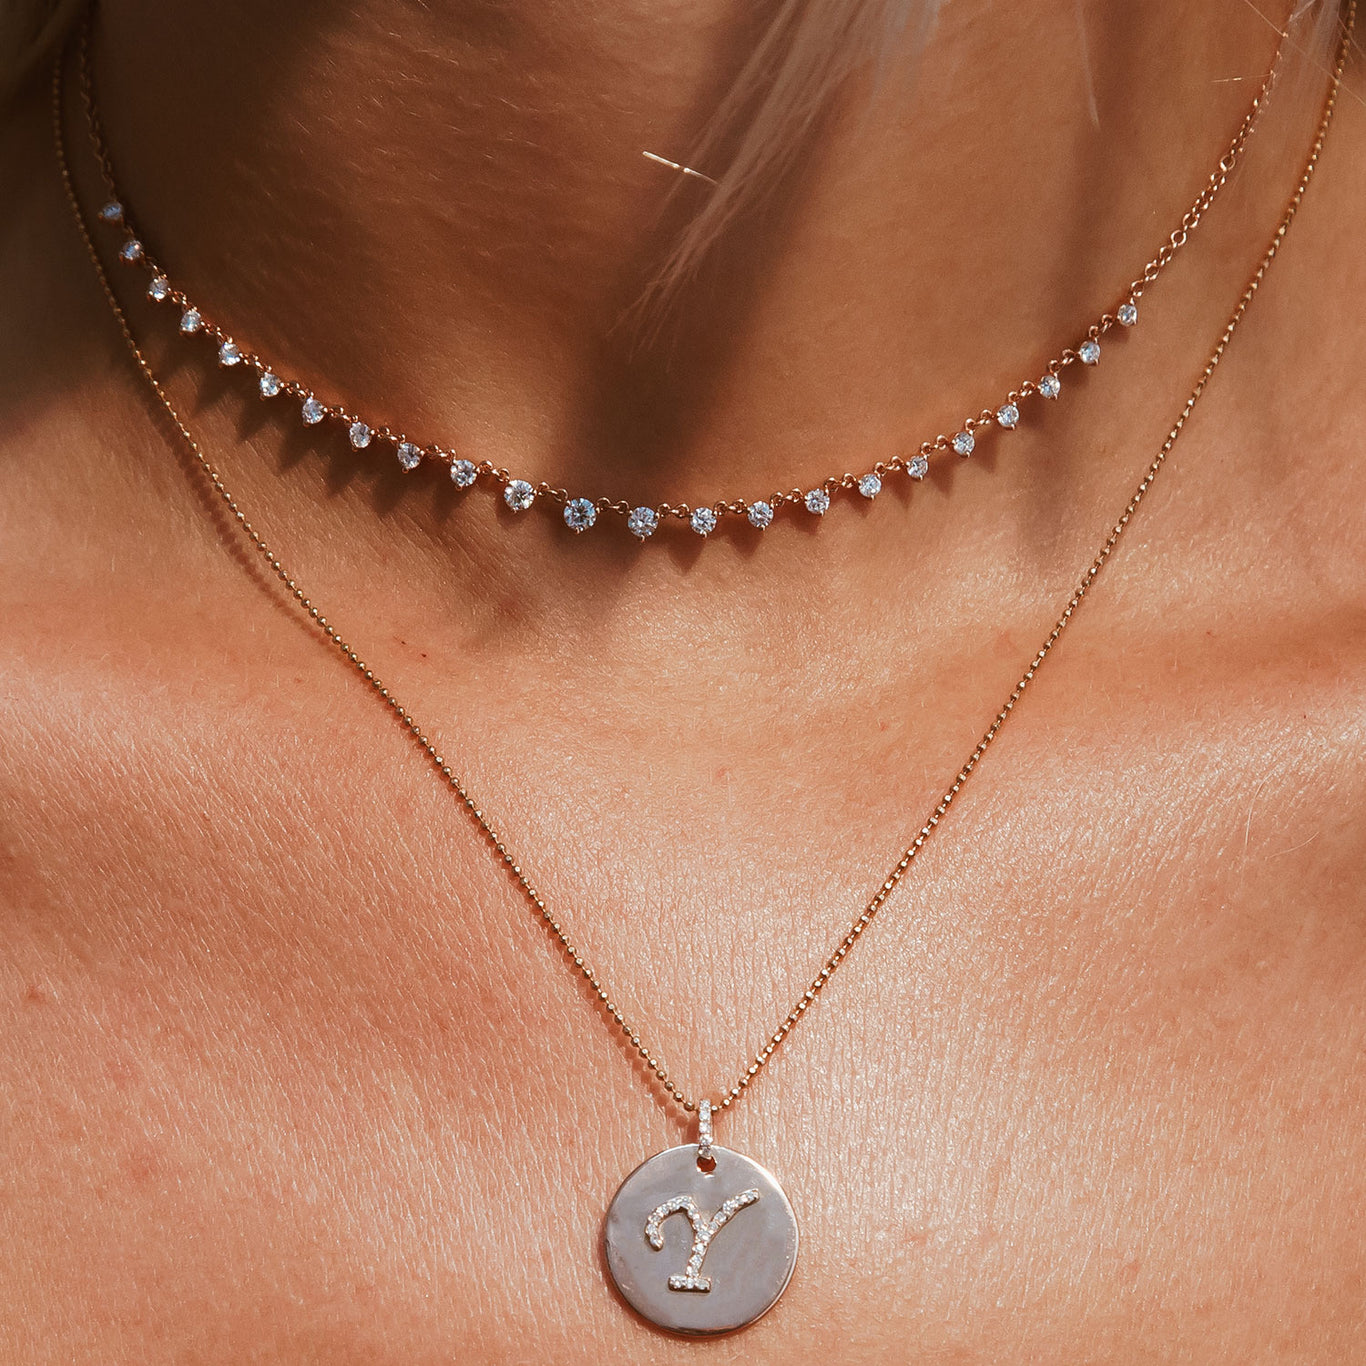 Our Starstruck Necklace shown layered with the Renata Necklace.